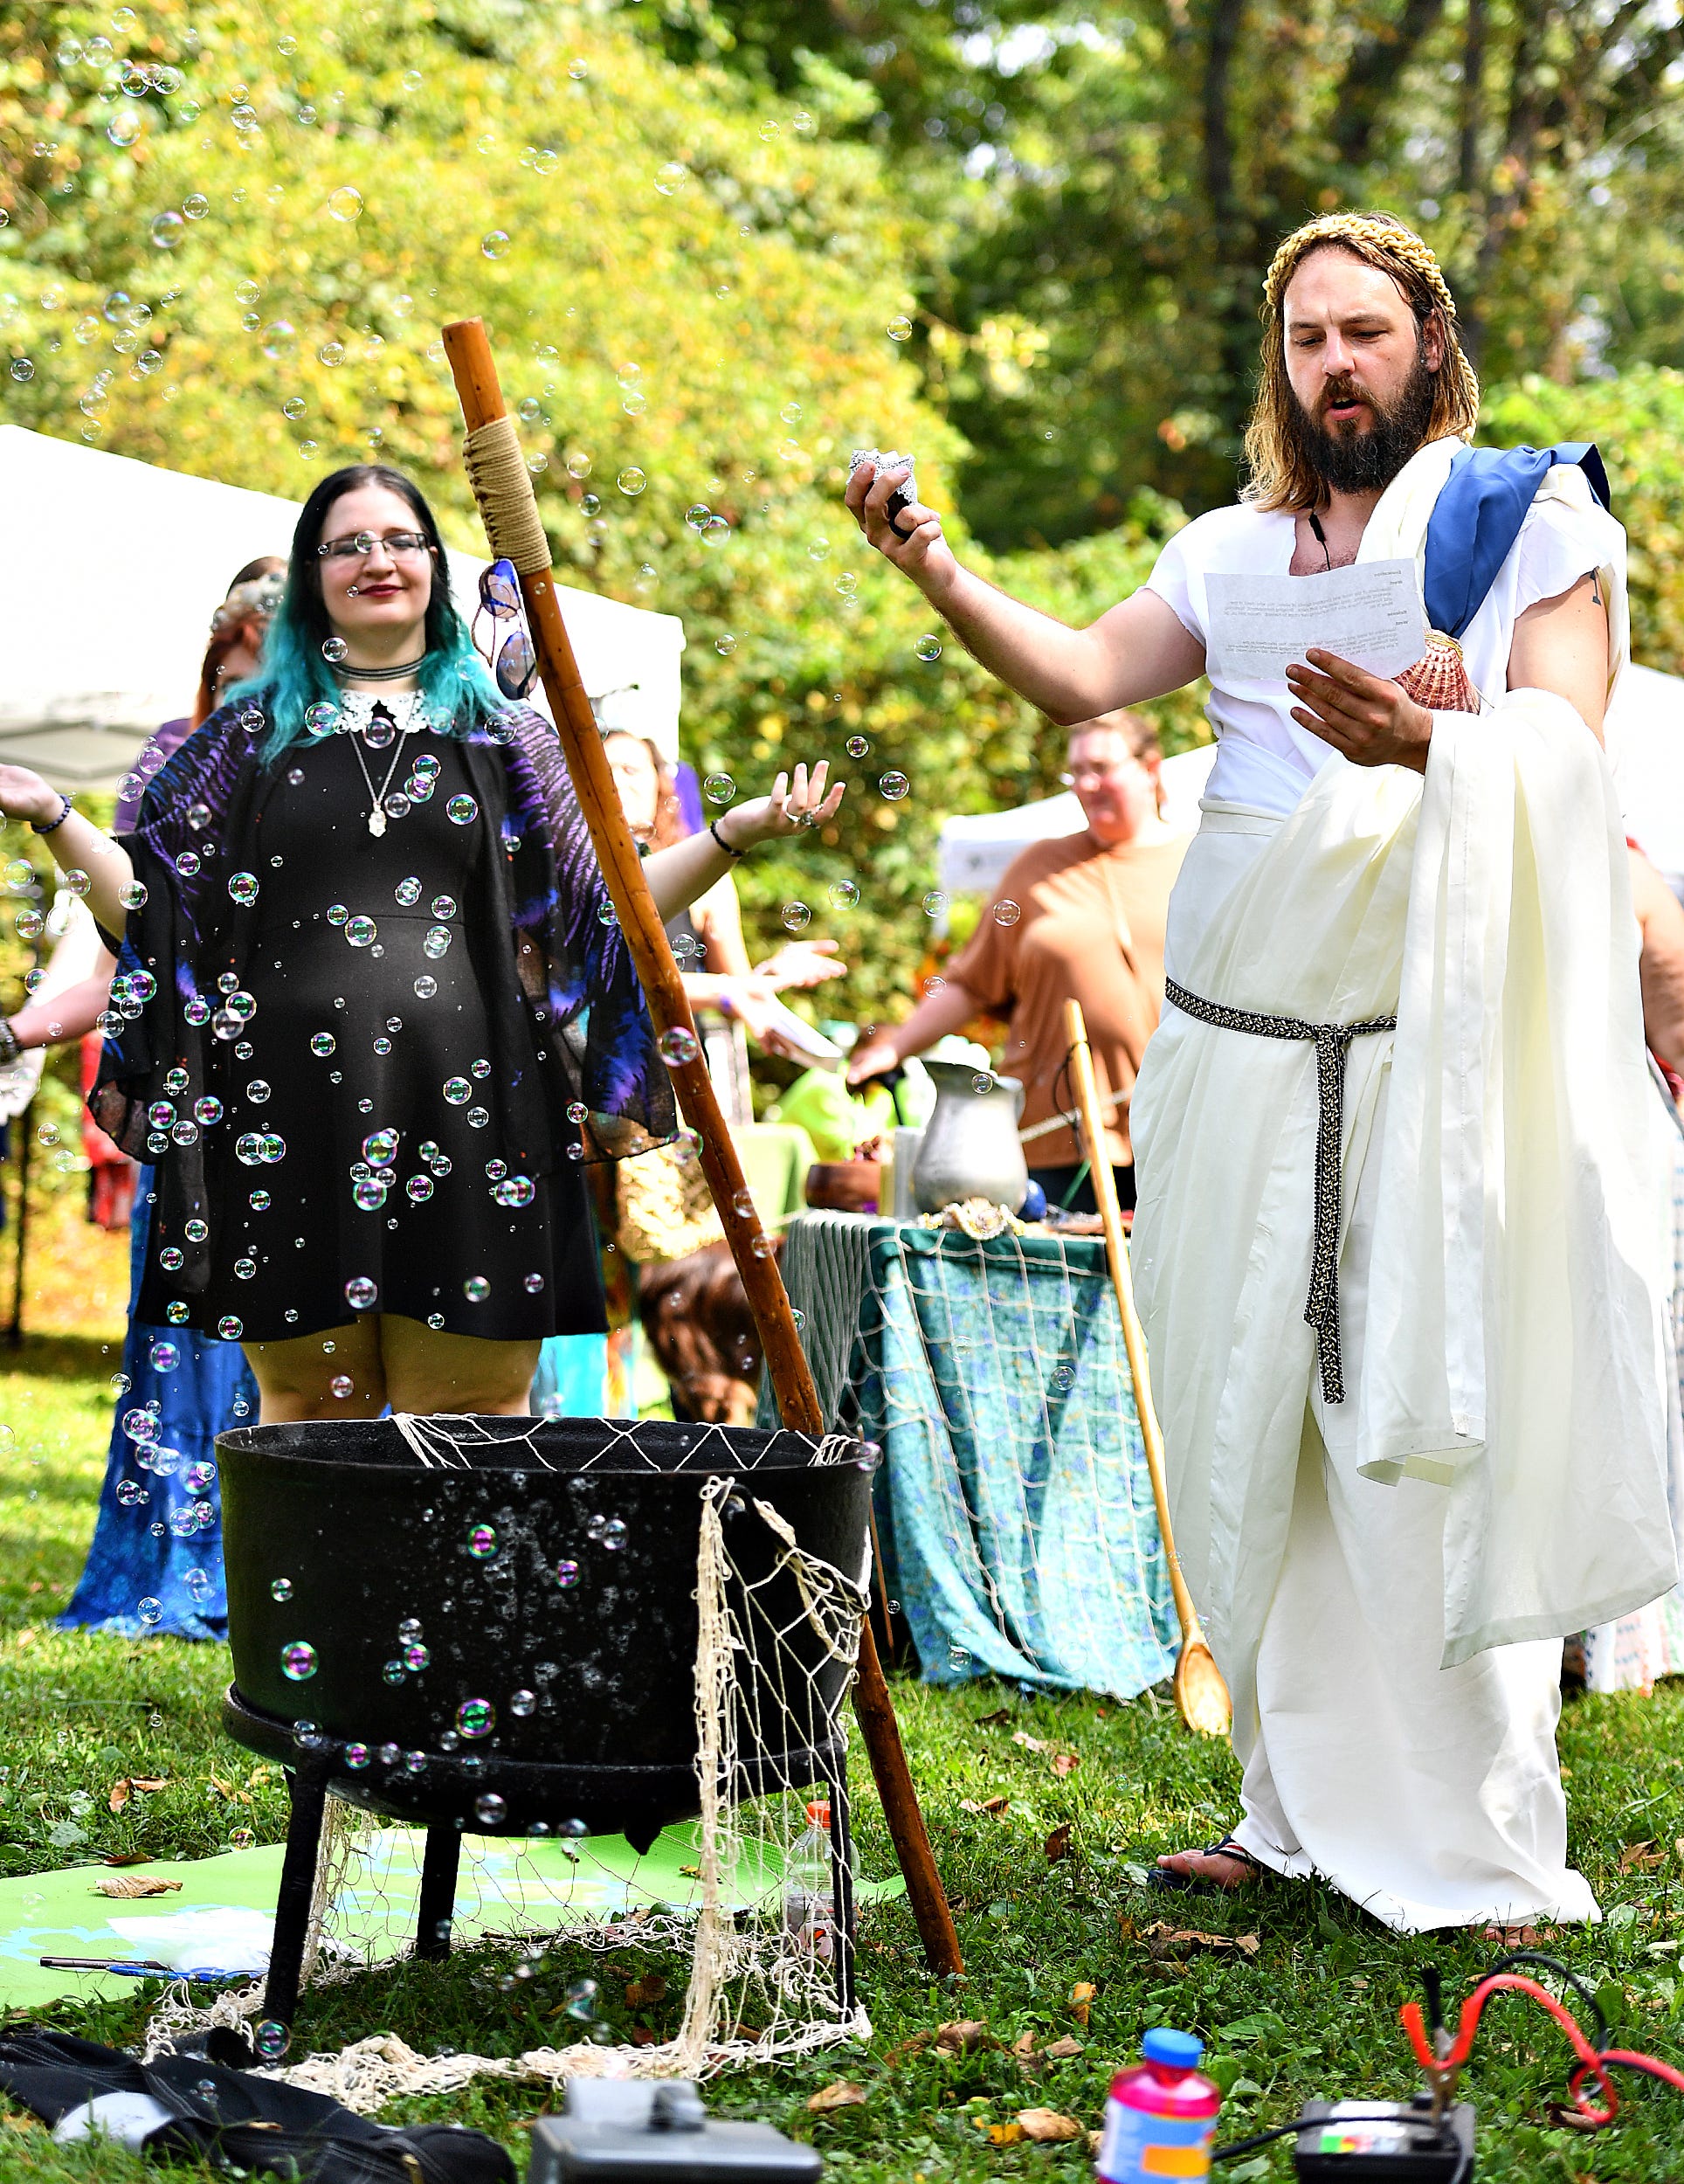 A harvest ritual is performed as the main ritual of the day, to honor both the harvest time of year and to cultivate community, during the 8th annual Pagan Pride Festival at Samuel S. Lewis State Park in Lower Windsor Township, Saturday, Sept. 28, 2019. Dawn J. Sagert photo